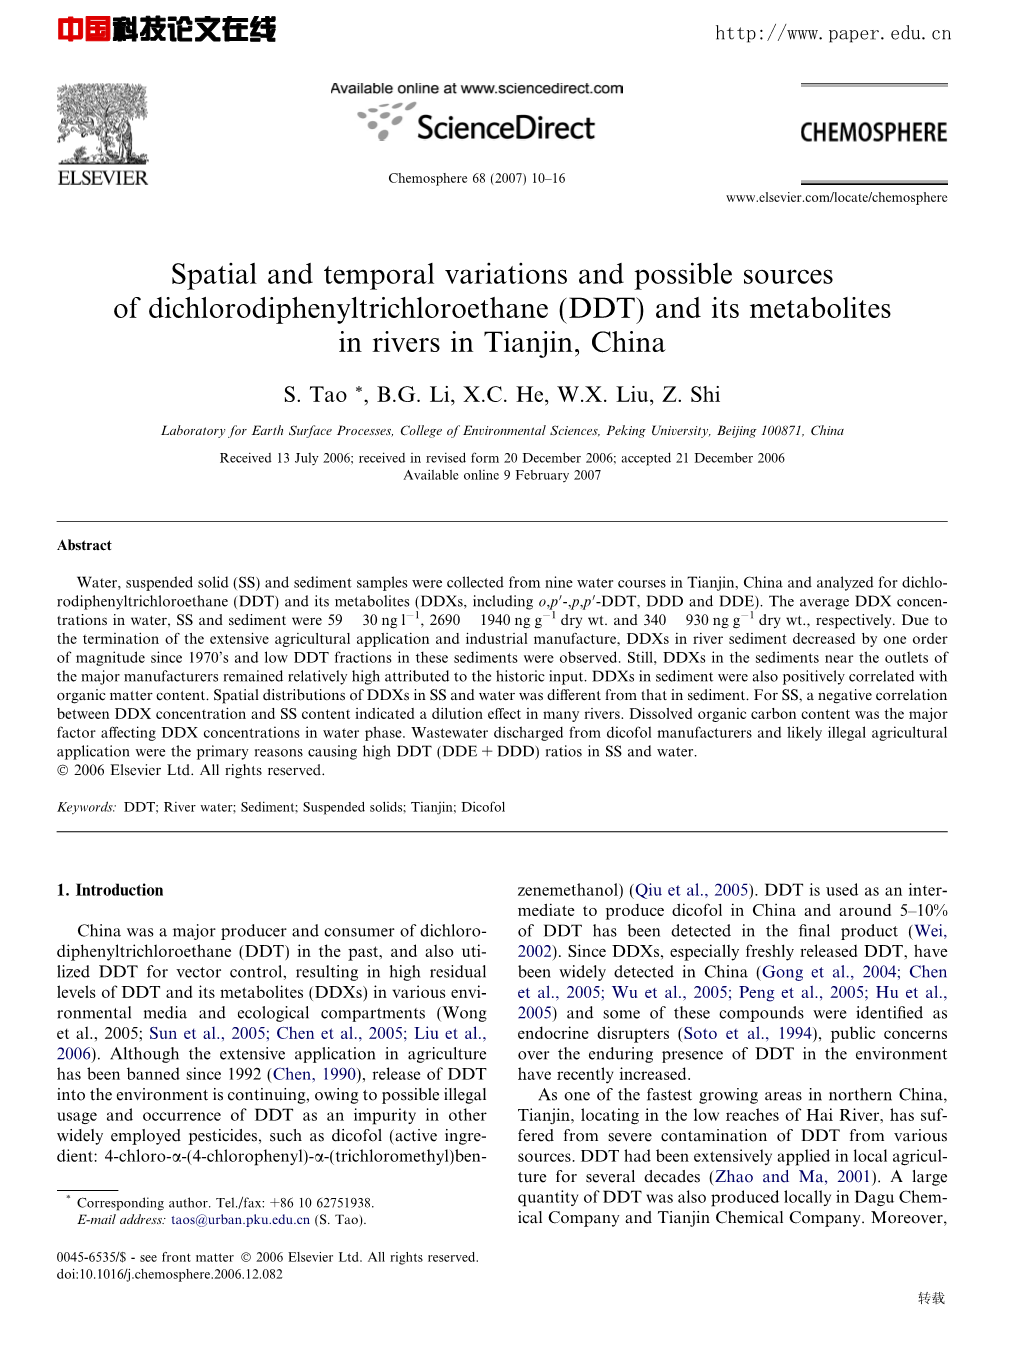 DDT) and Its Metabolites in Rivers in Tianjin, China